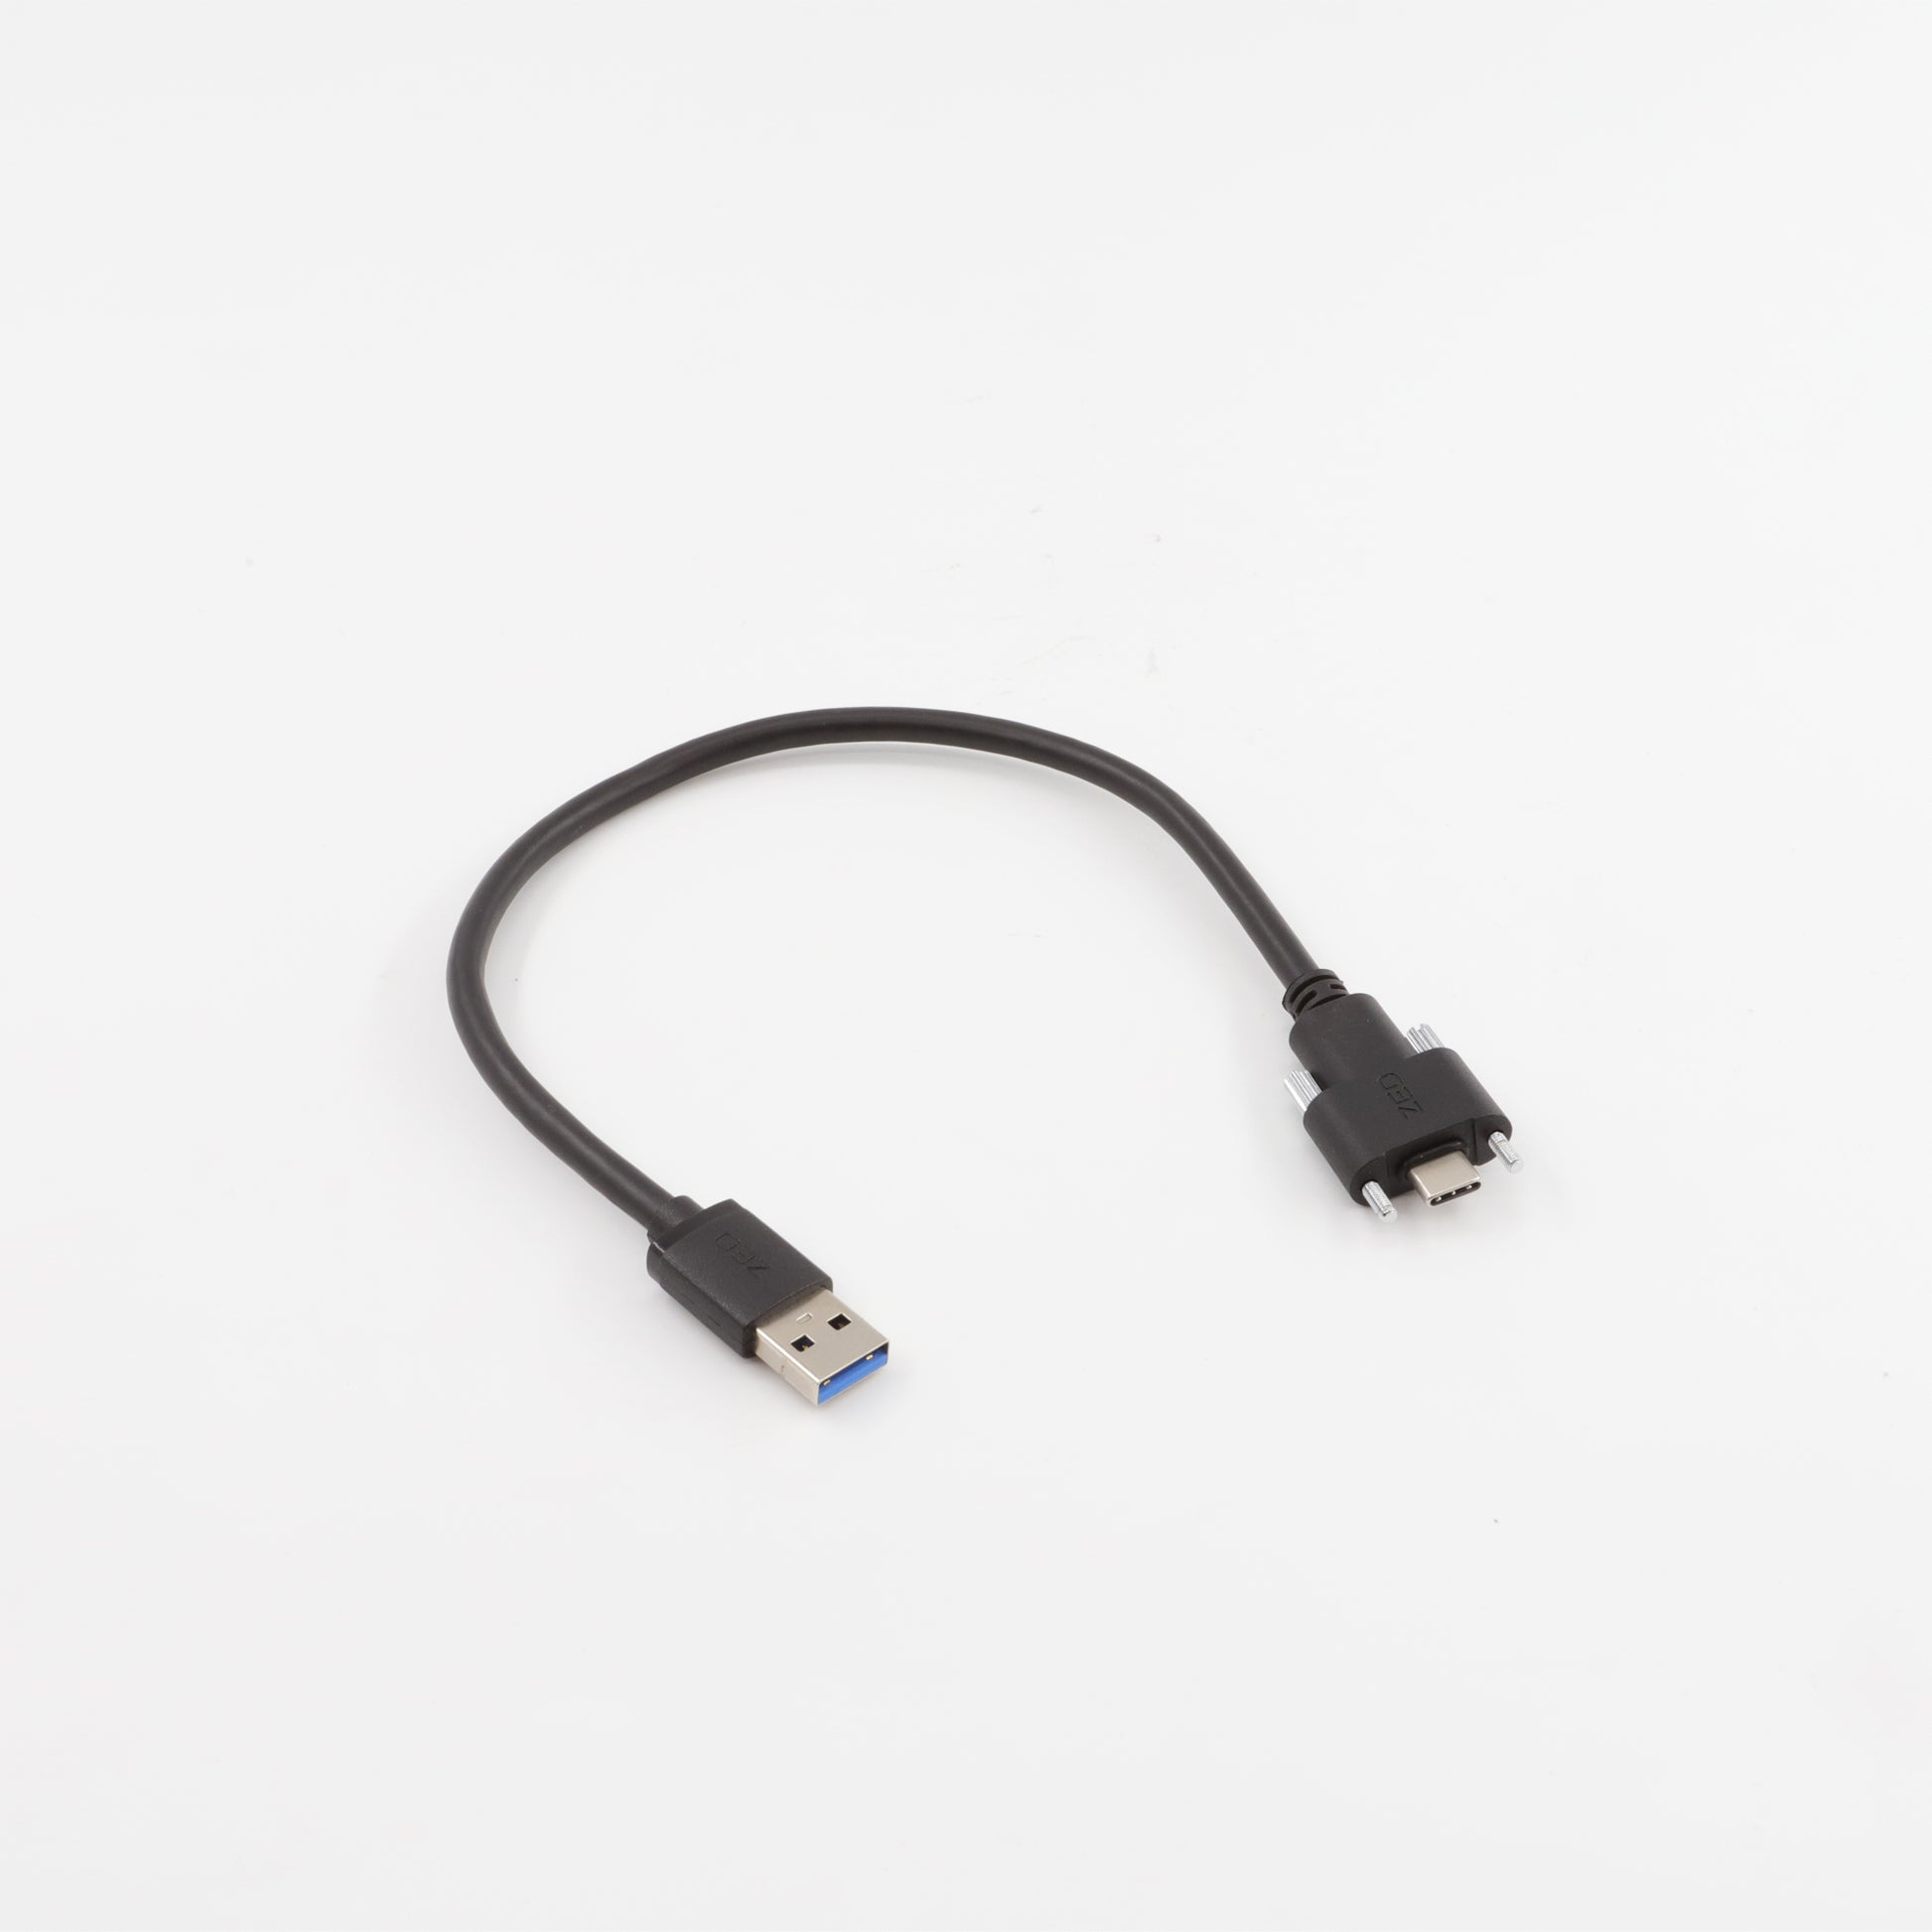 USB 3.0 Type-C Dual Screw Cable | Stereolabs